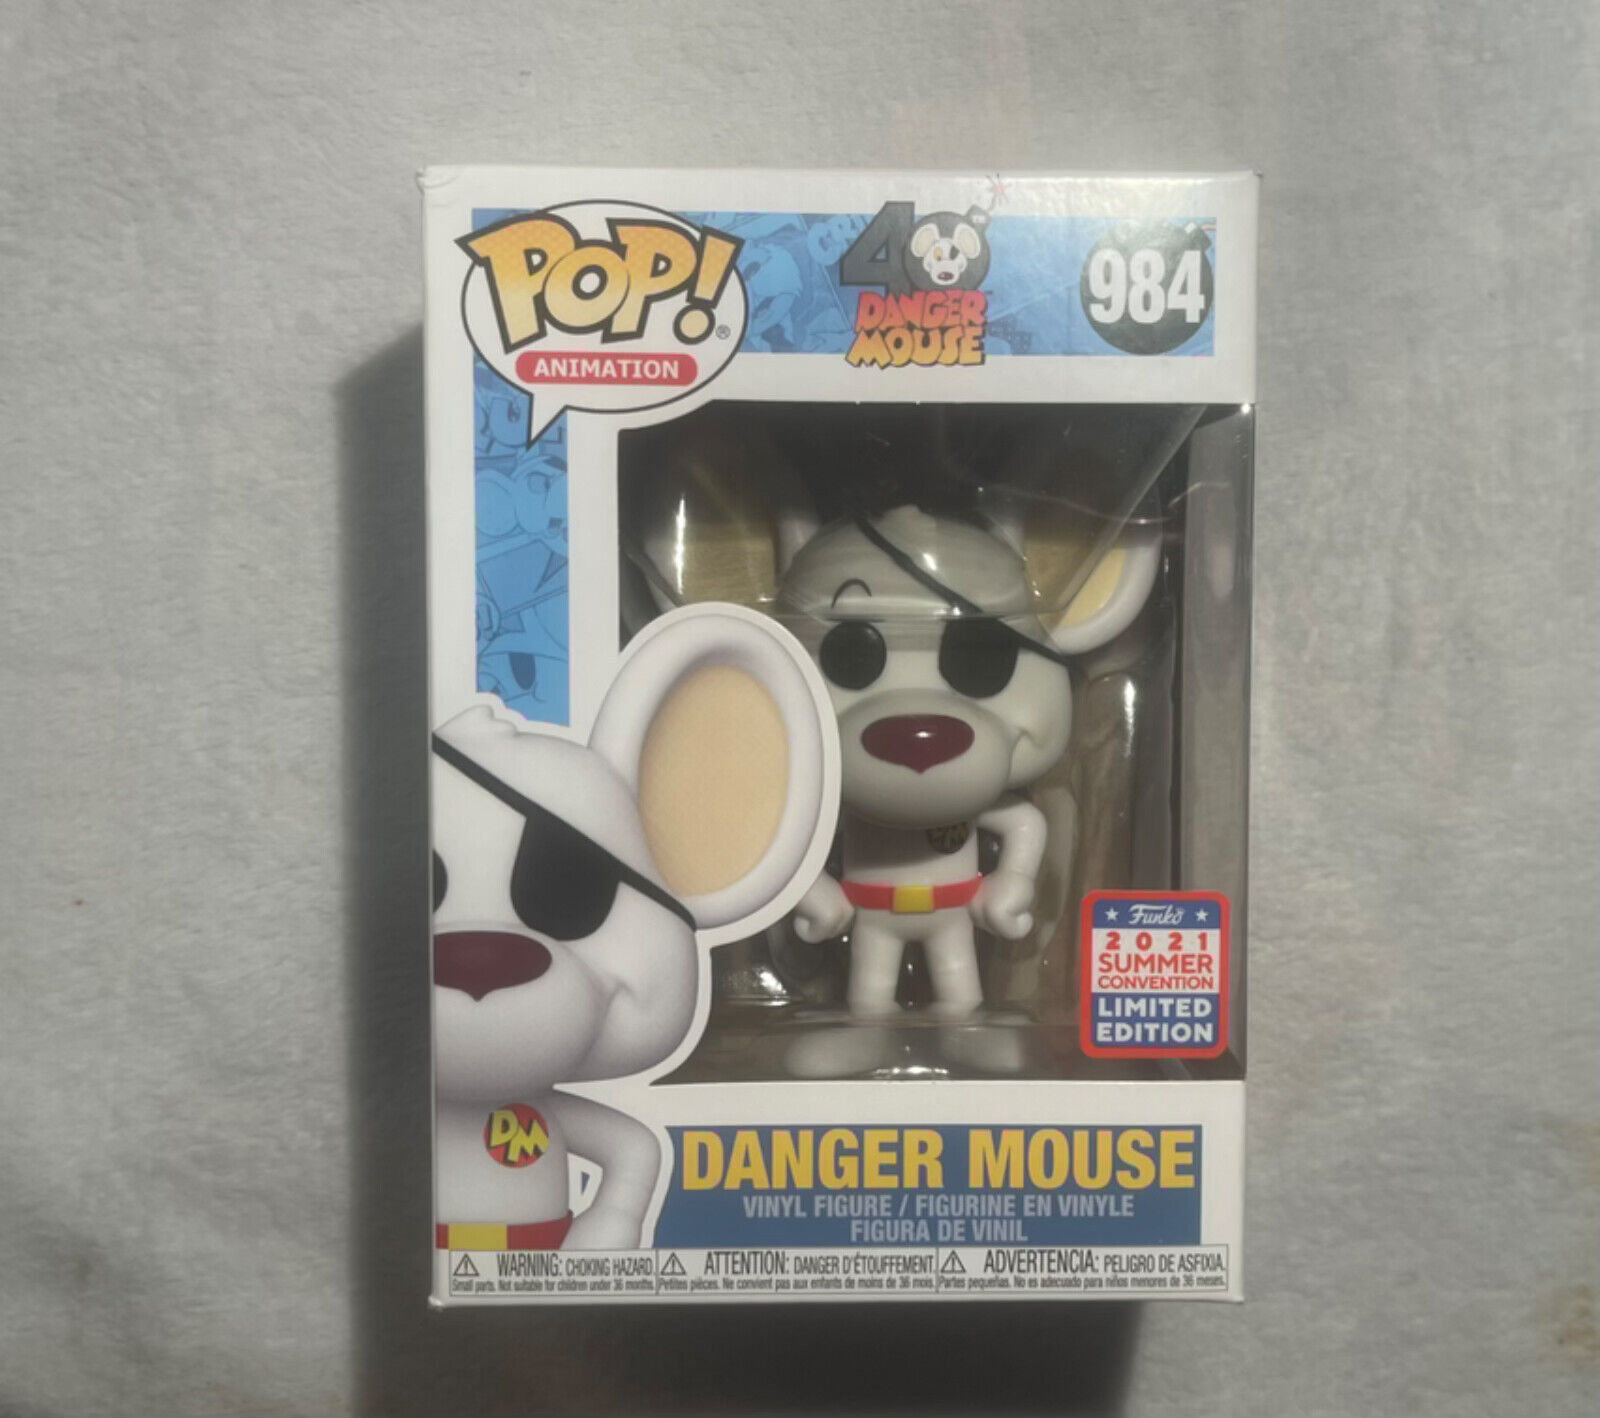 Funko Pop Danger Mouse 984 2021 Summer Convention Limited Animation NIB